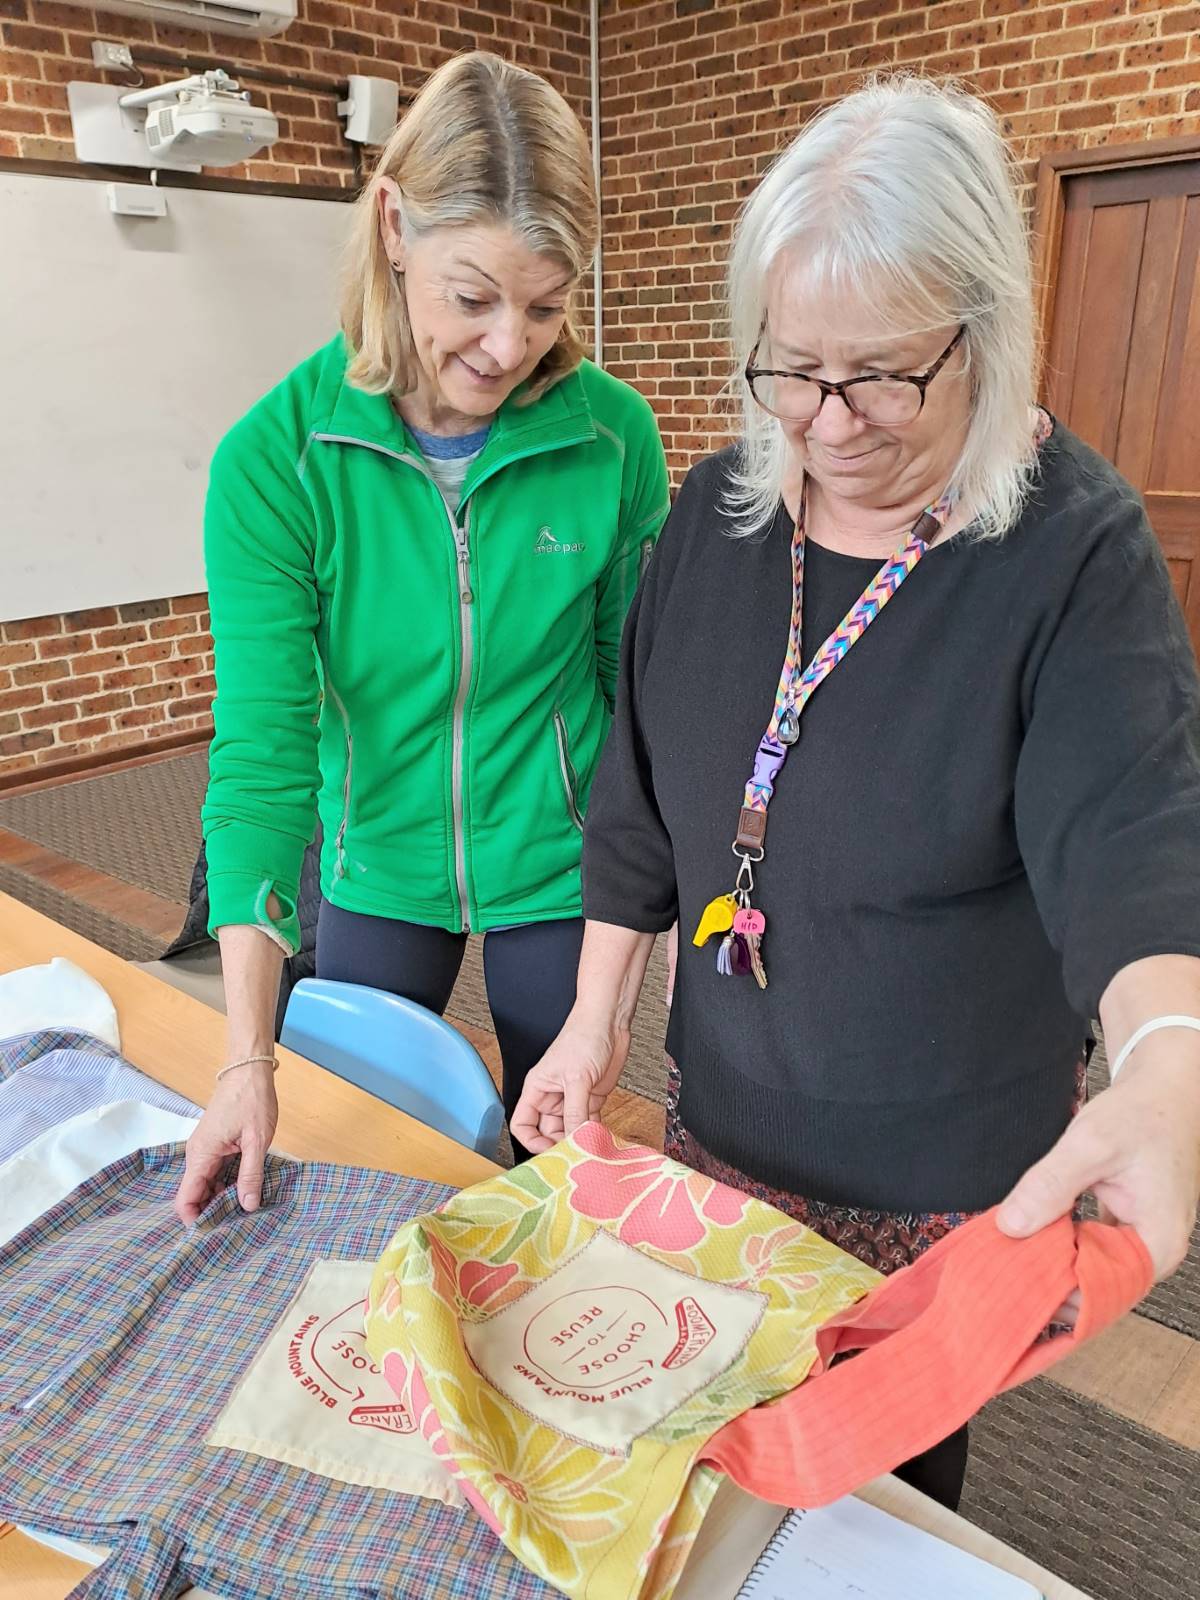 Alison and Maria admiring the various fabrics donated to the group.